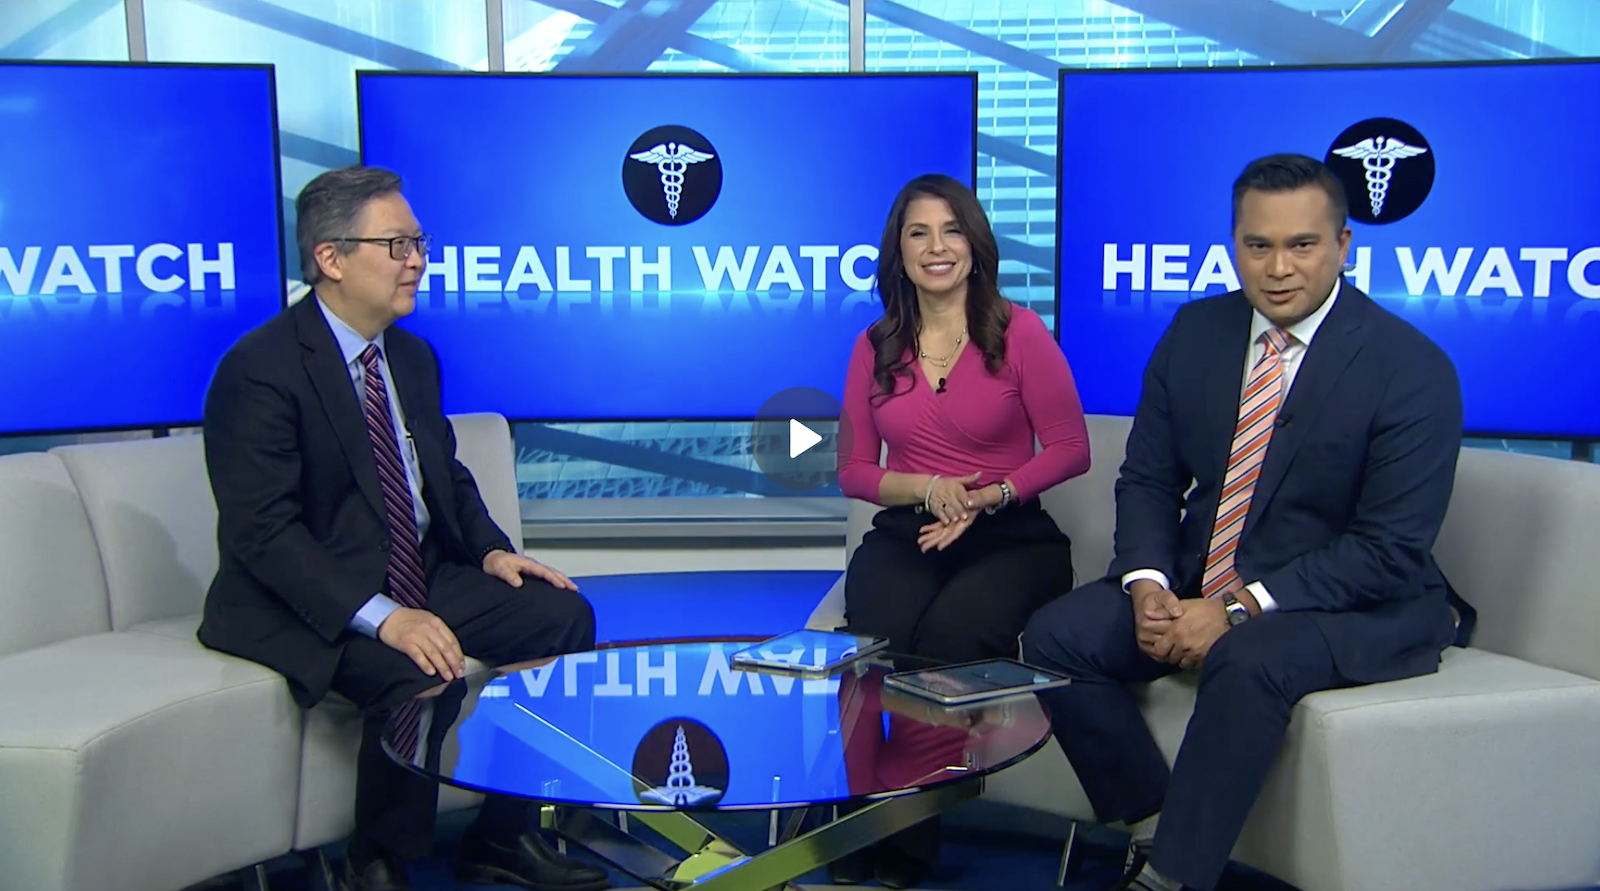 Dr. Frank Chae speaks about how weight loss is at the top of the list of New Year's resolution for many Americans to CBS Denver